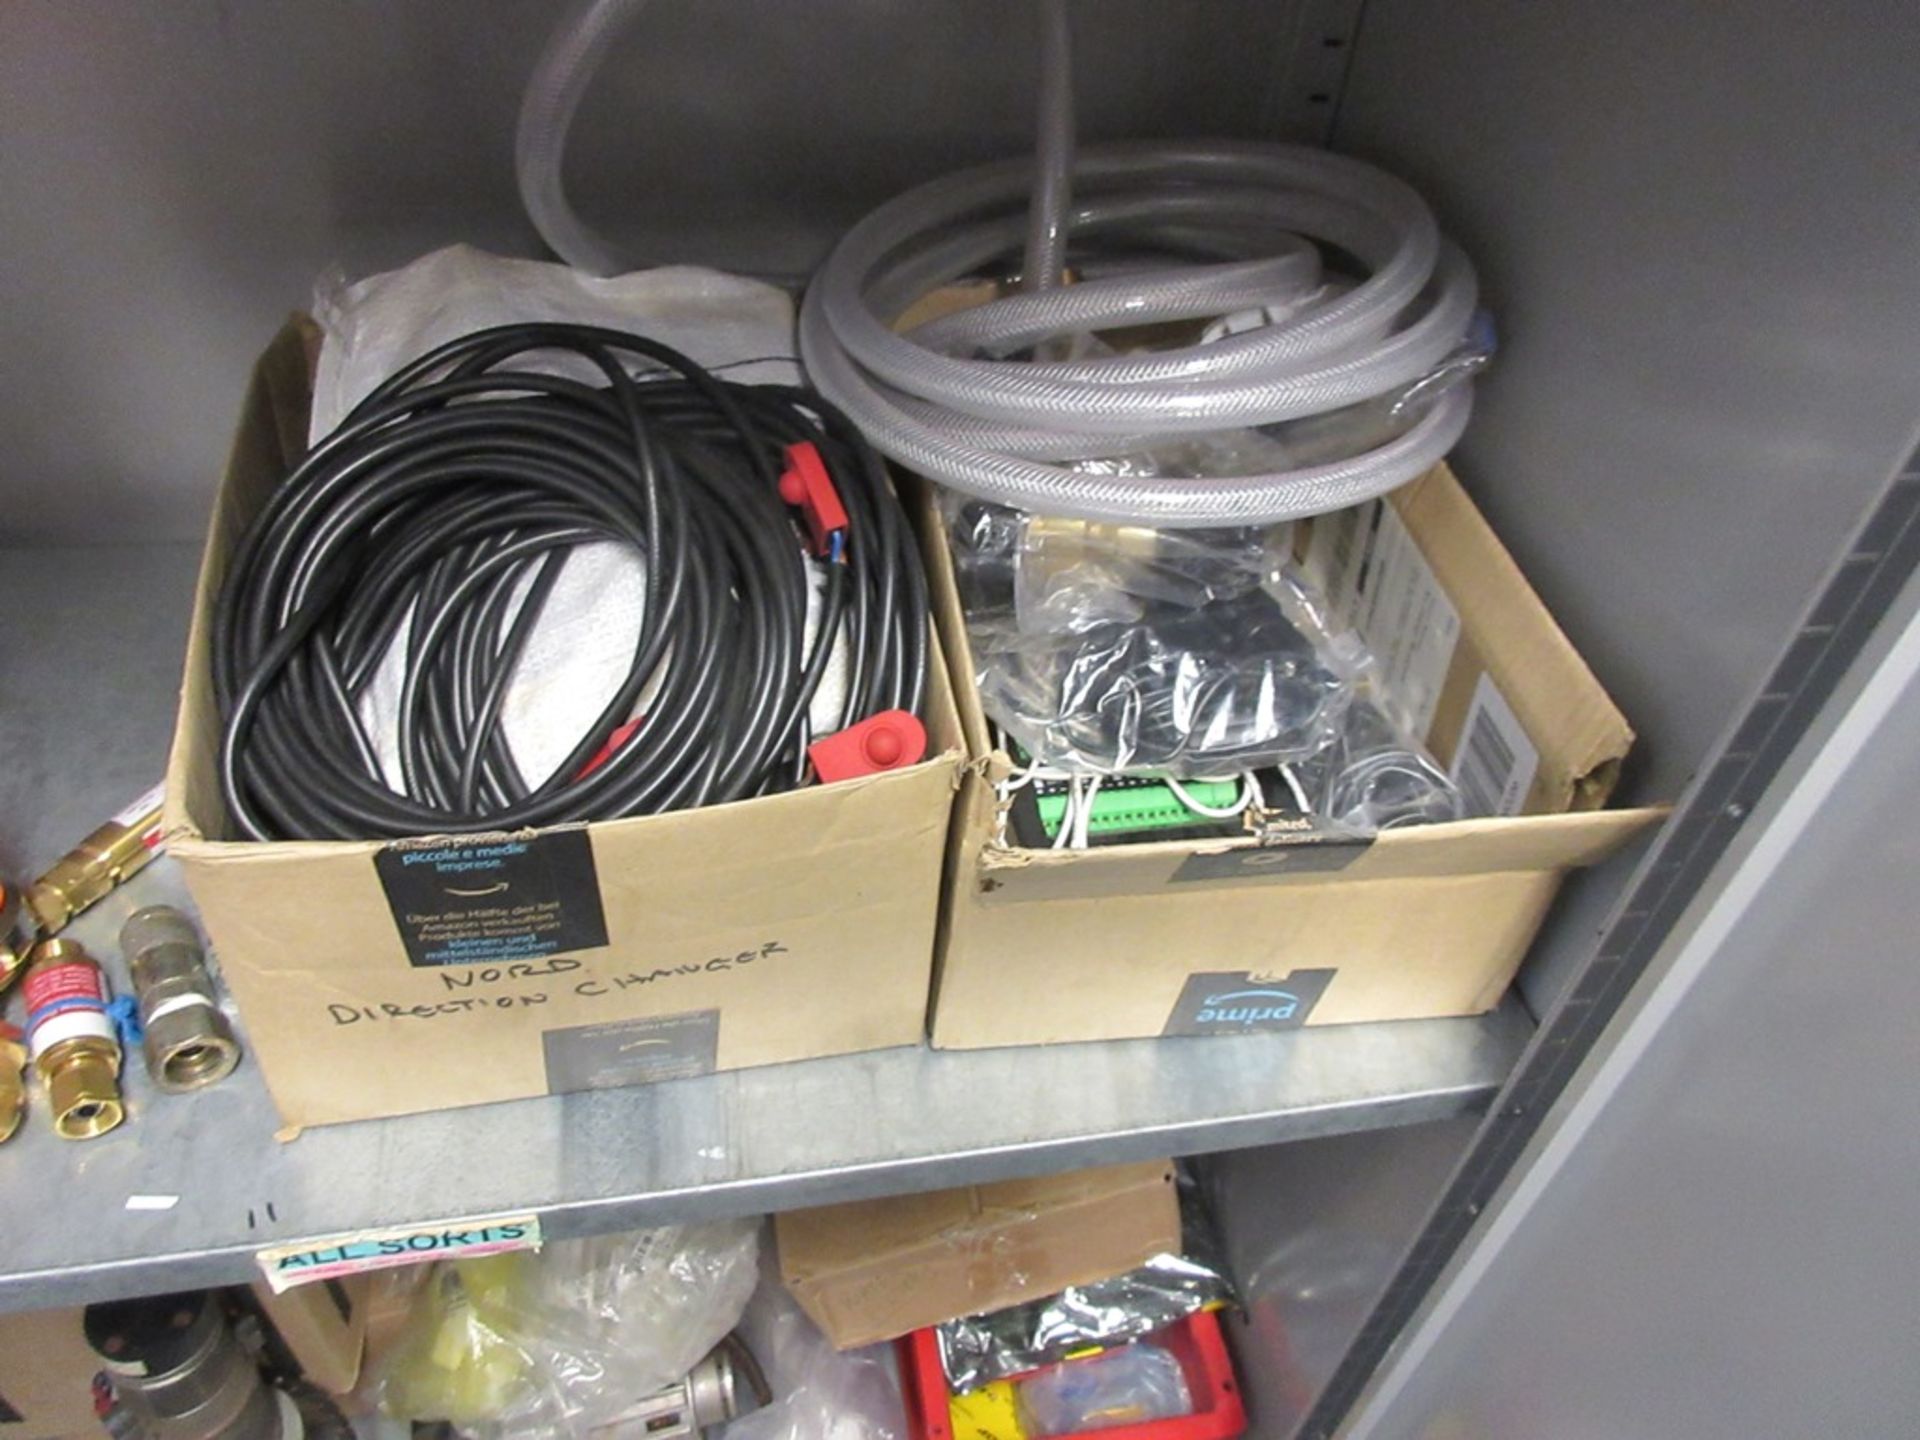 Cupboard and contents including gas regulators, power supply units, electrode connectors, janes, - Image 5 of 9